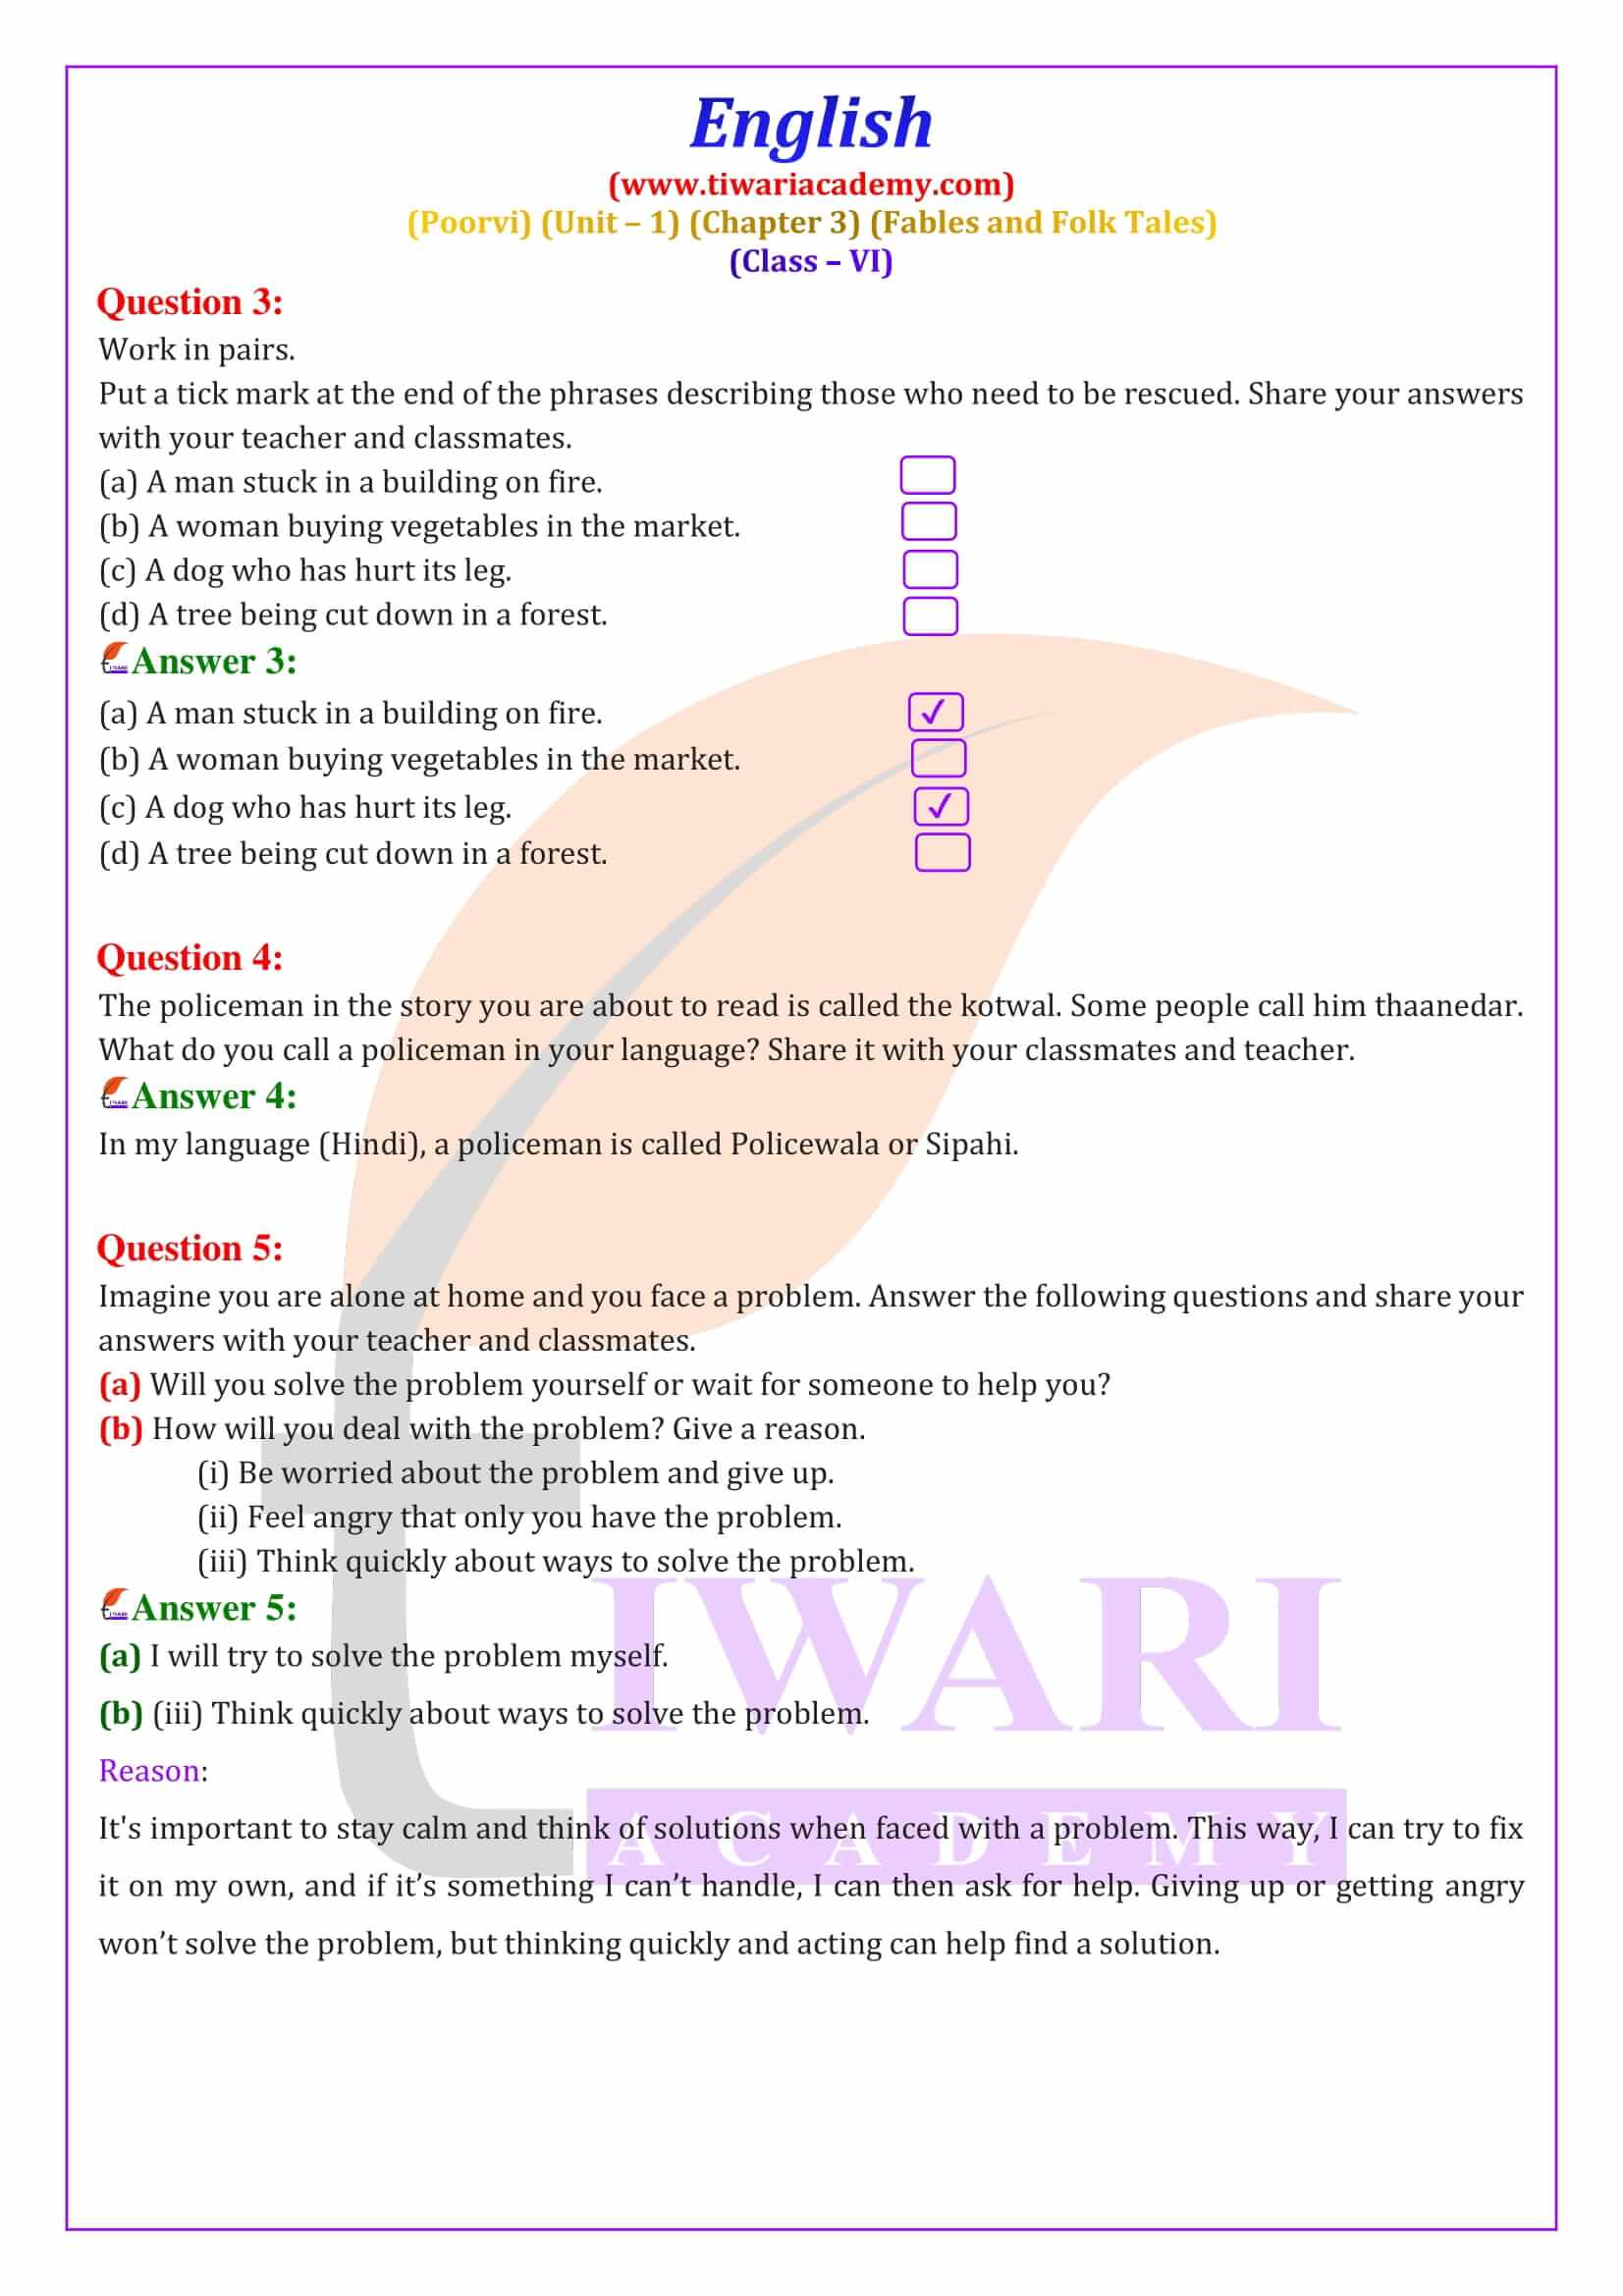 NCERT for Class 6 English Poorvi Unit 1 Fables and Folk Tales Chapter 3 Rama to the Rescue